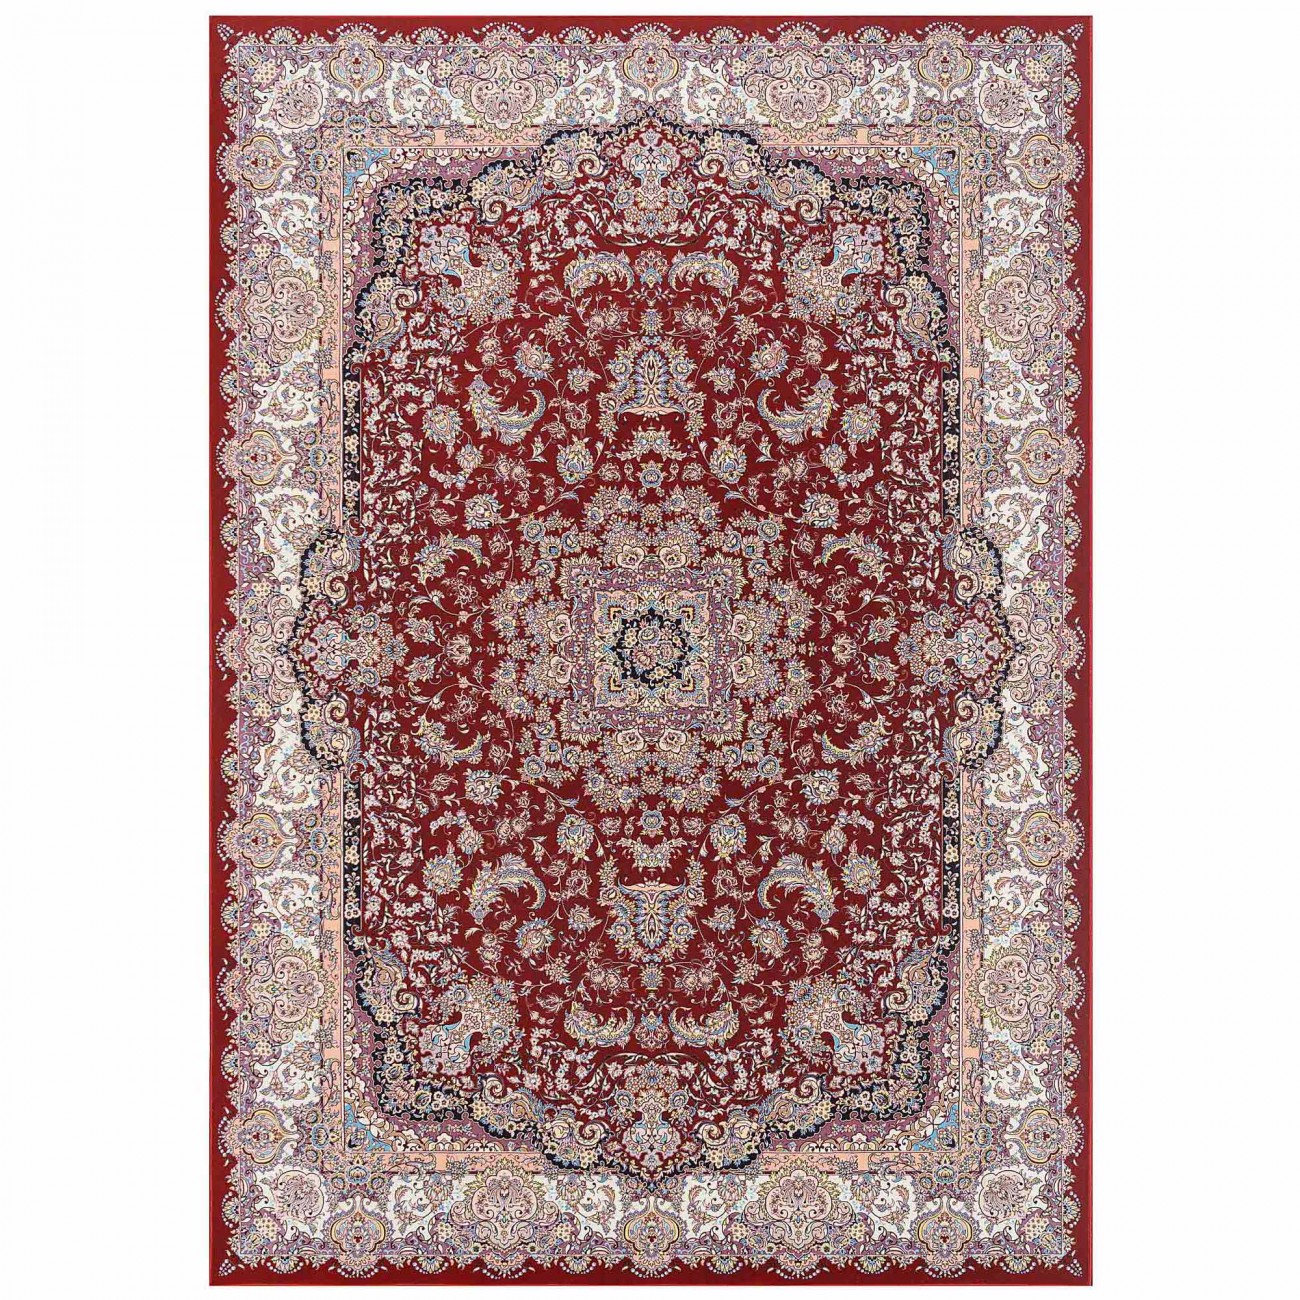 Tapete Royal Red - 200x285